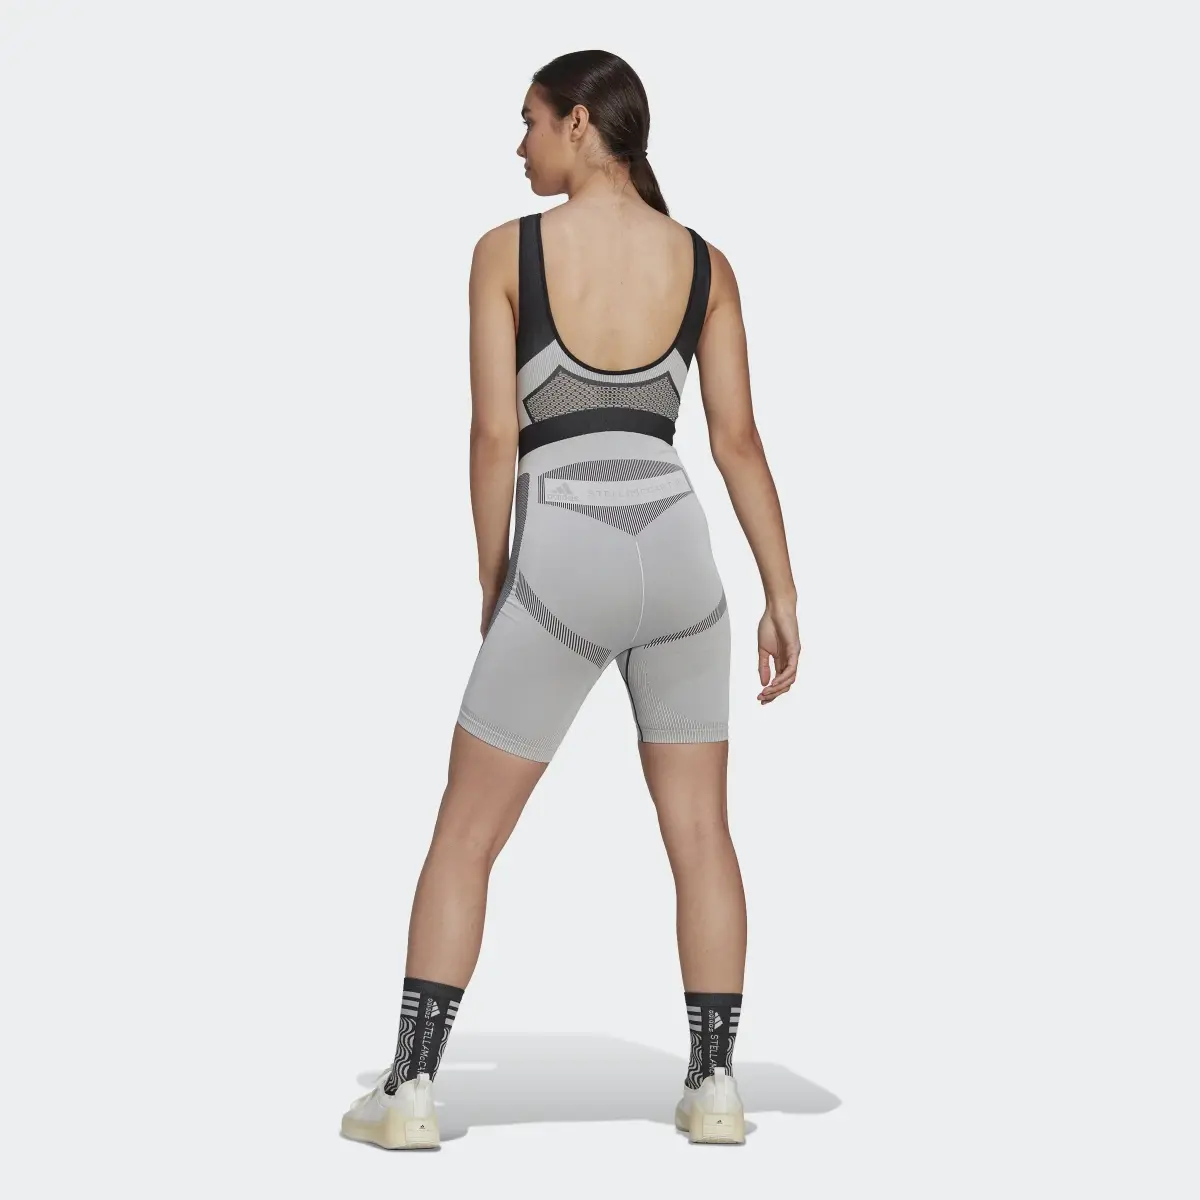 Adidas by Stella McCartney TrueStrength Seamless Training All-in-One Suit. 3